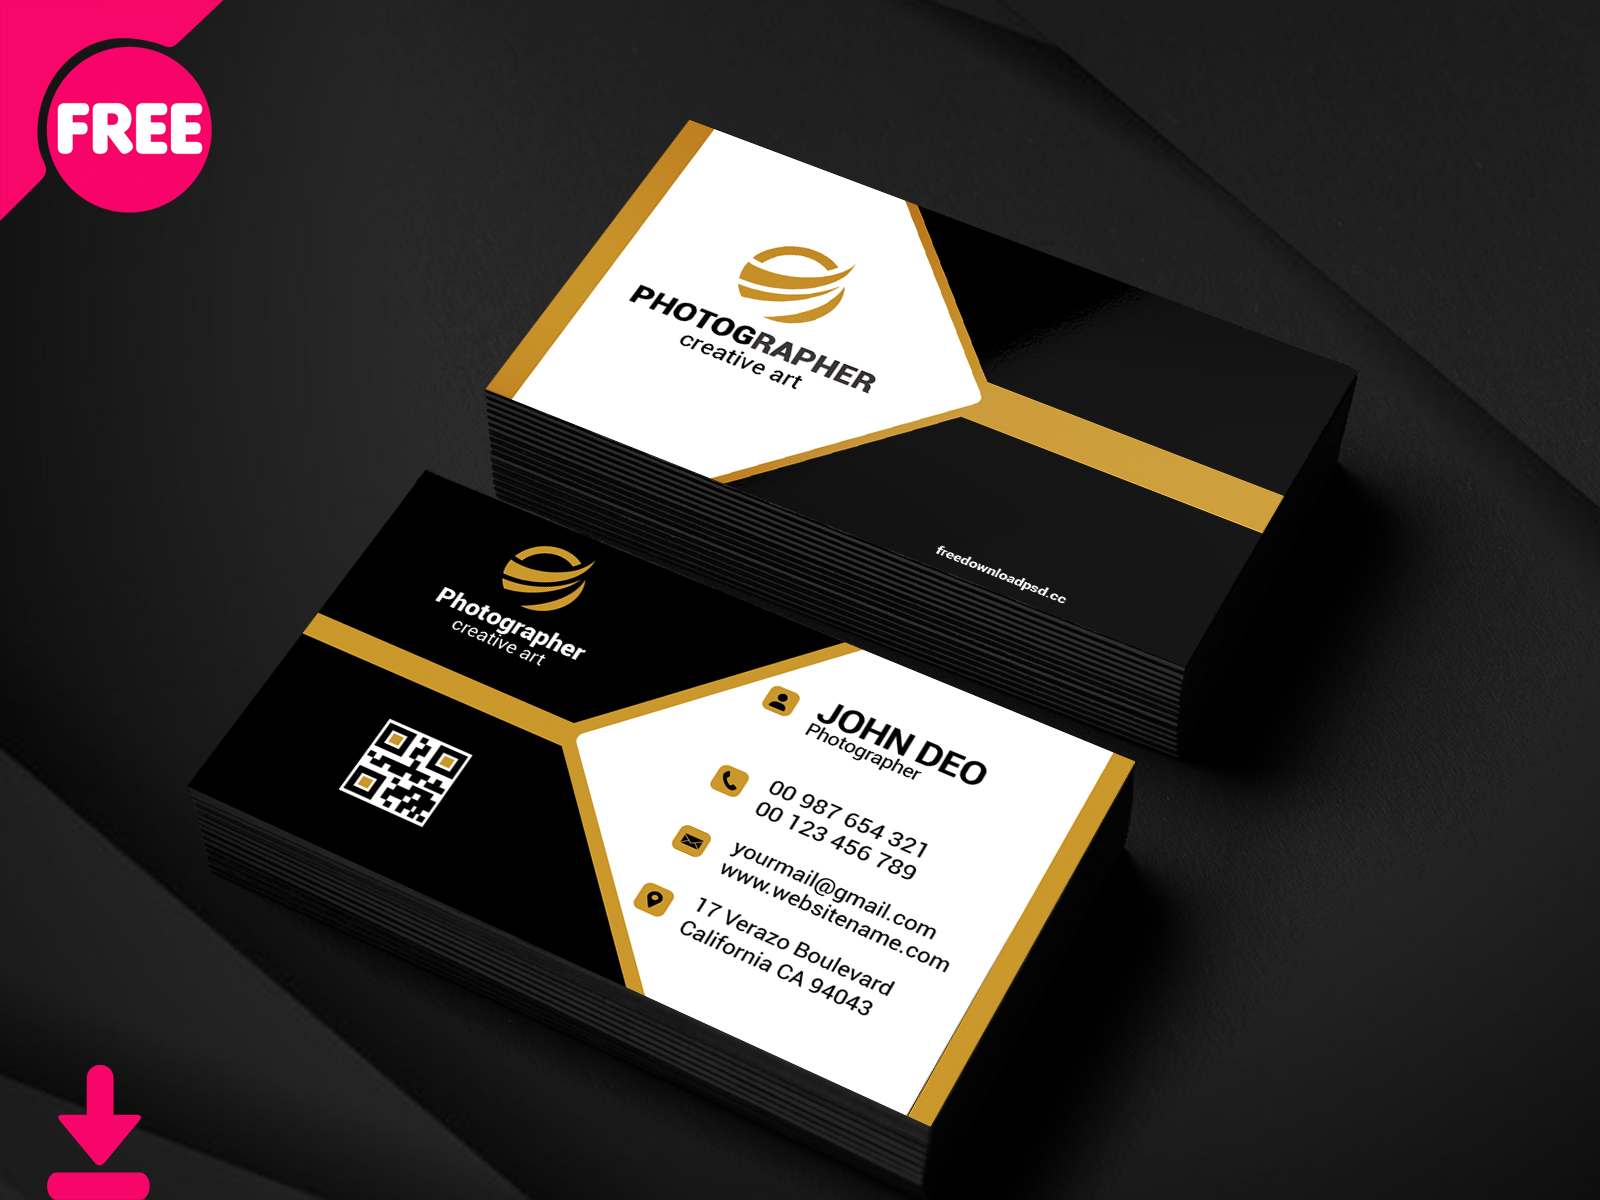 Free Sample Photography Business Card Psd Template Cover by Sheikh With Regard To Business Card Template Photoshop Cs6